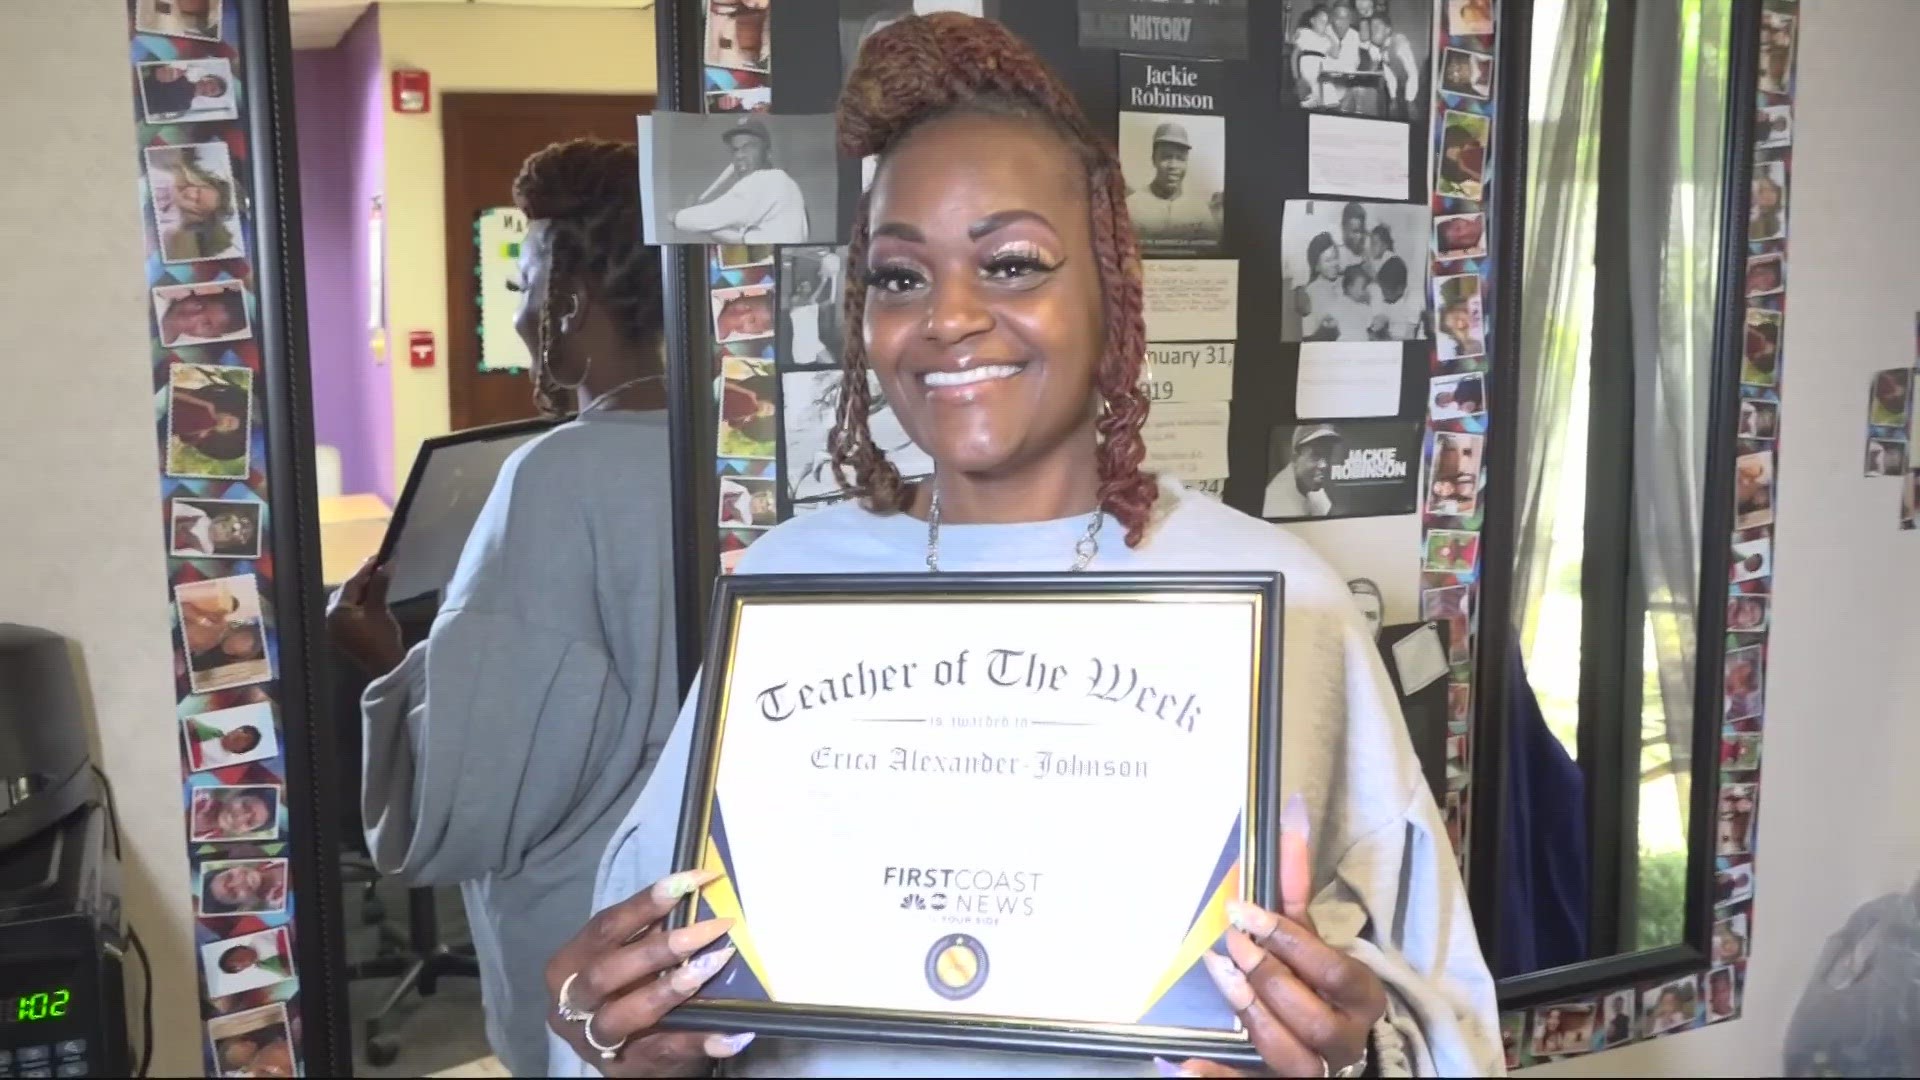 This week, our Teacher of the Week honoree is carrying out her duties in a school that was created to give youth hope.